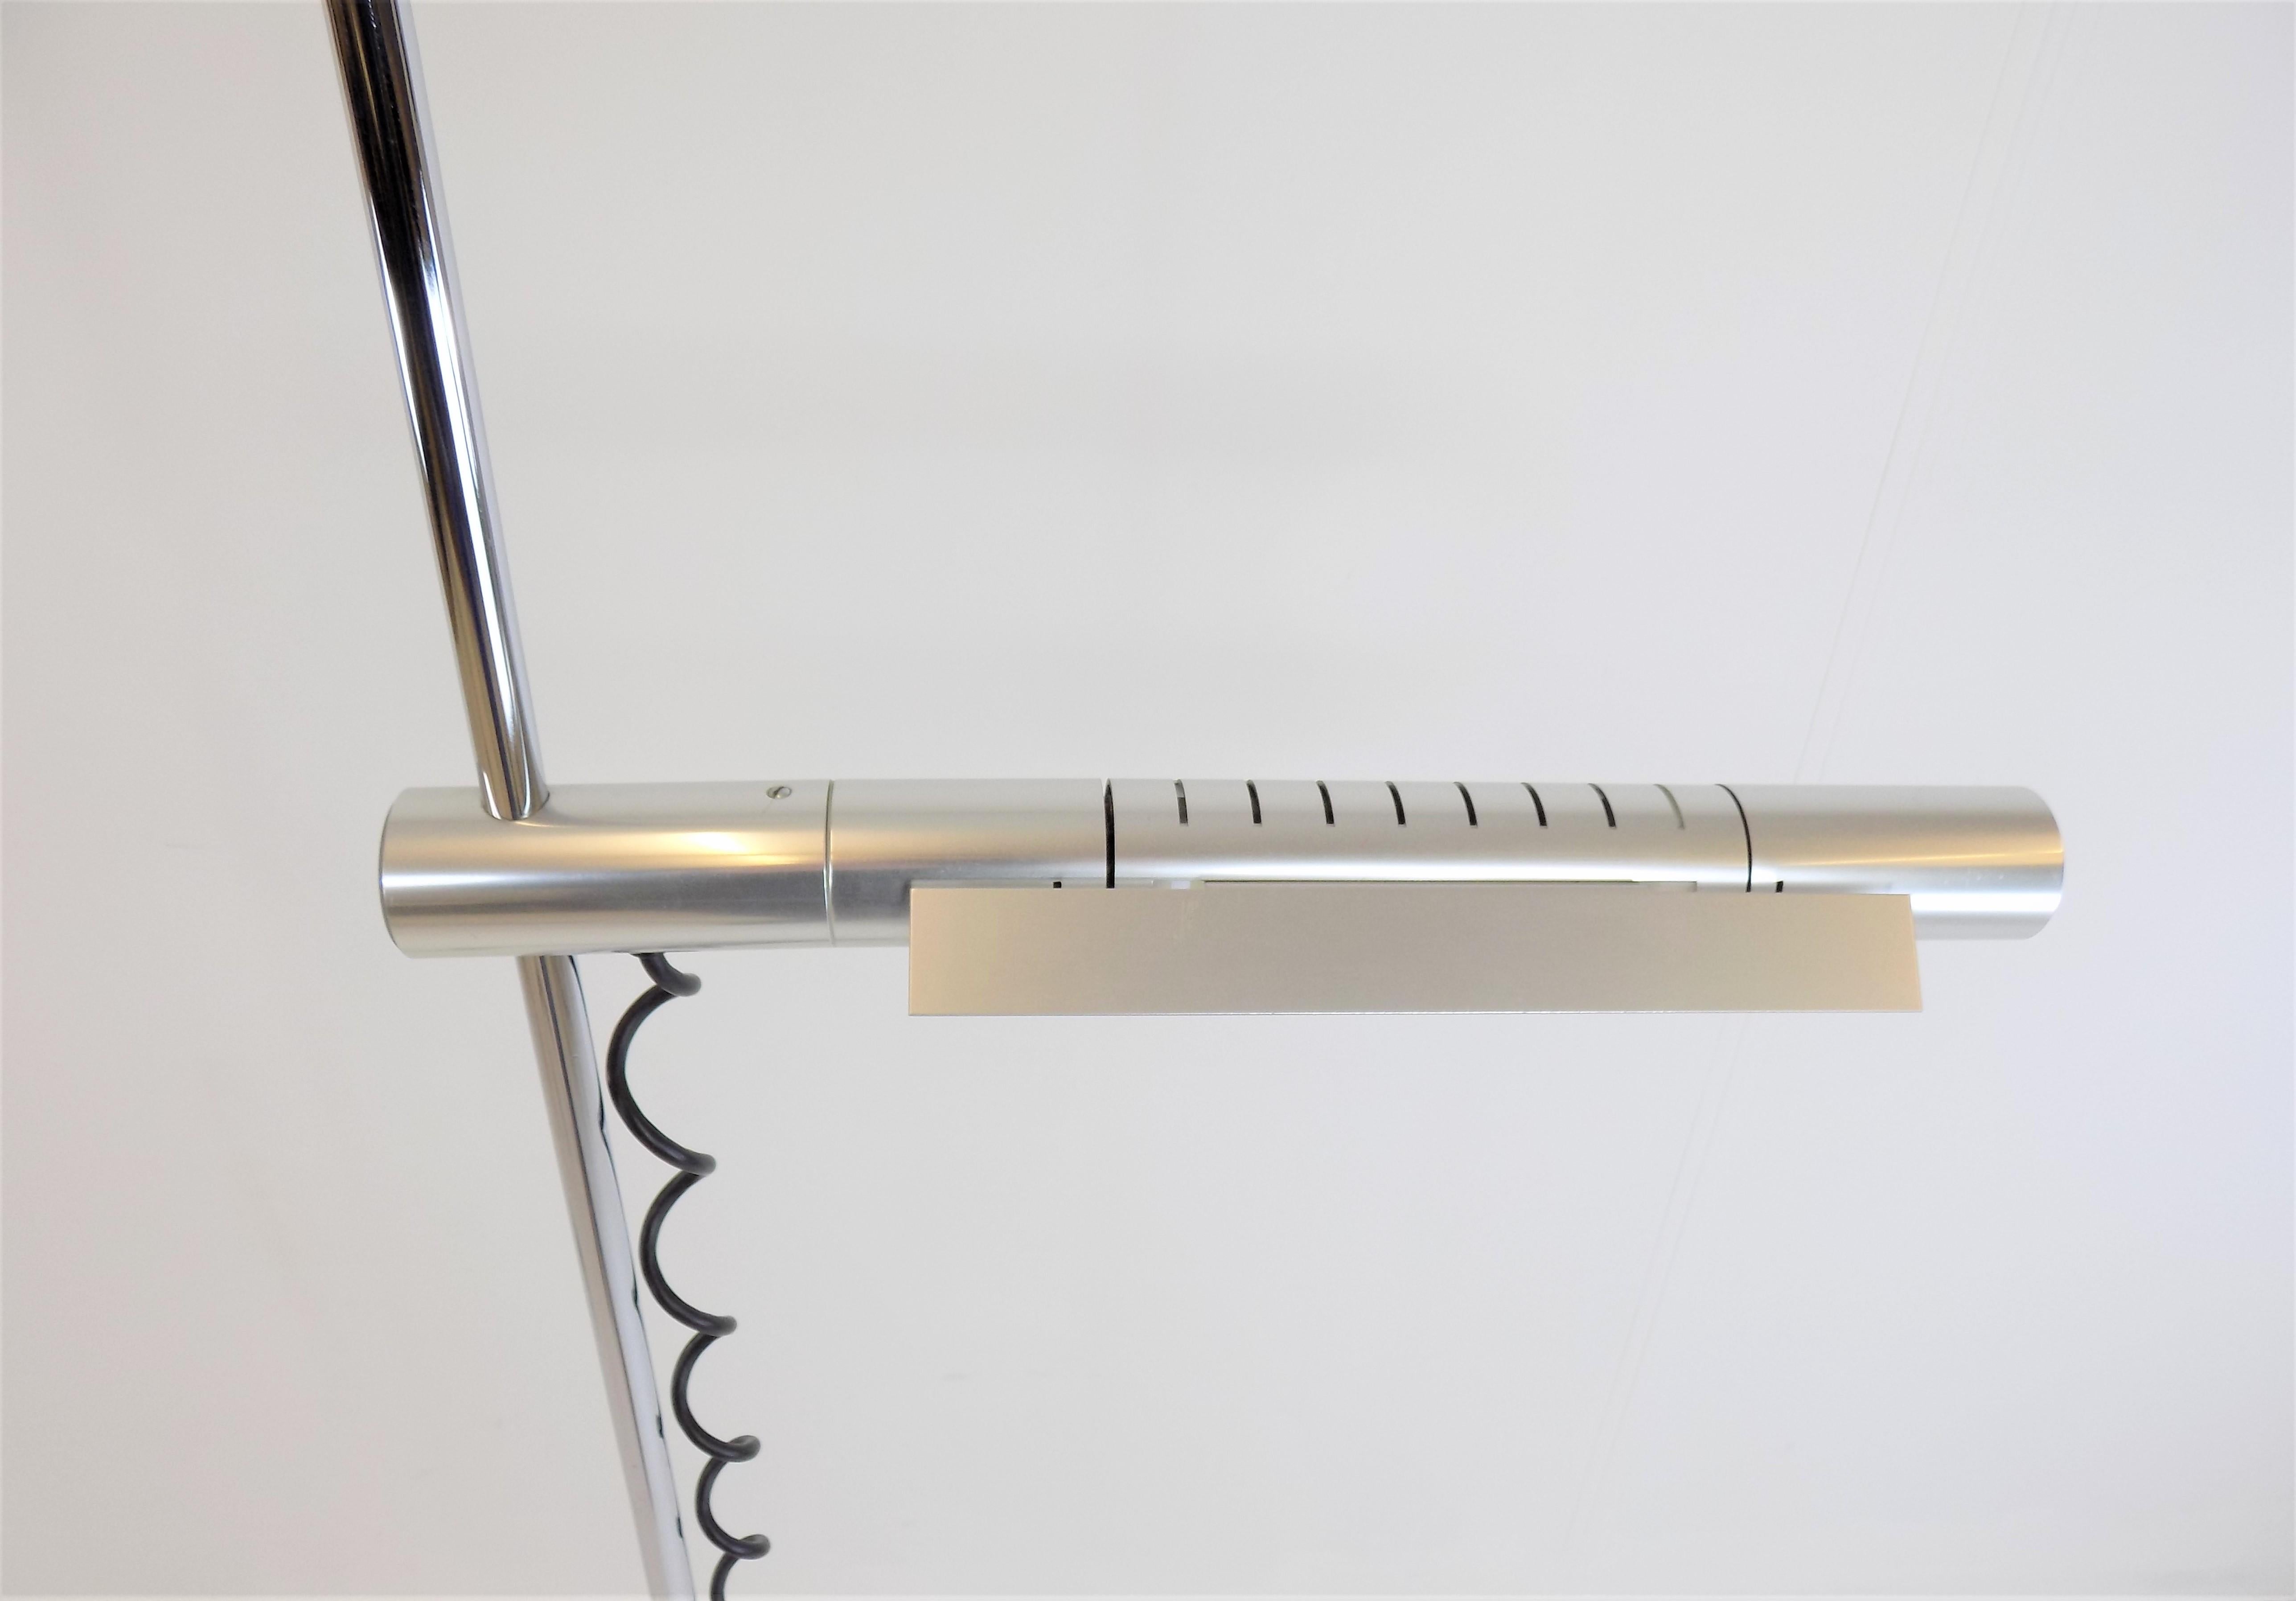 Swisslamps International Halo 250 Floor Lamp by R. and R. Baltensweiler In Good Condition For Sale In Ludwigslust, DE